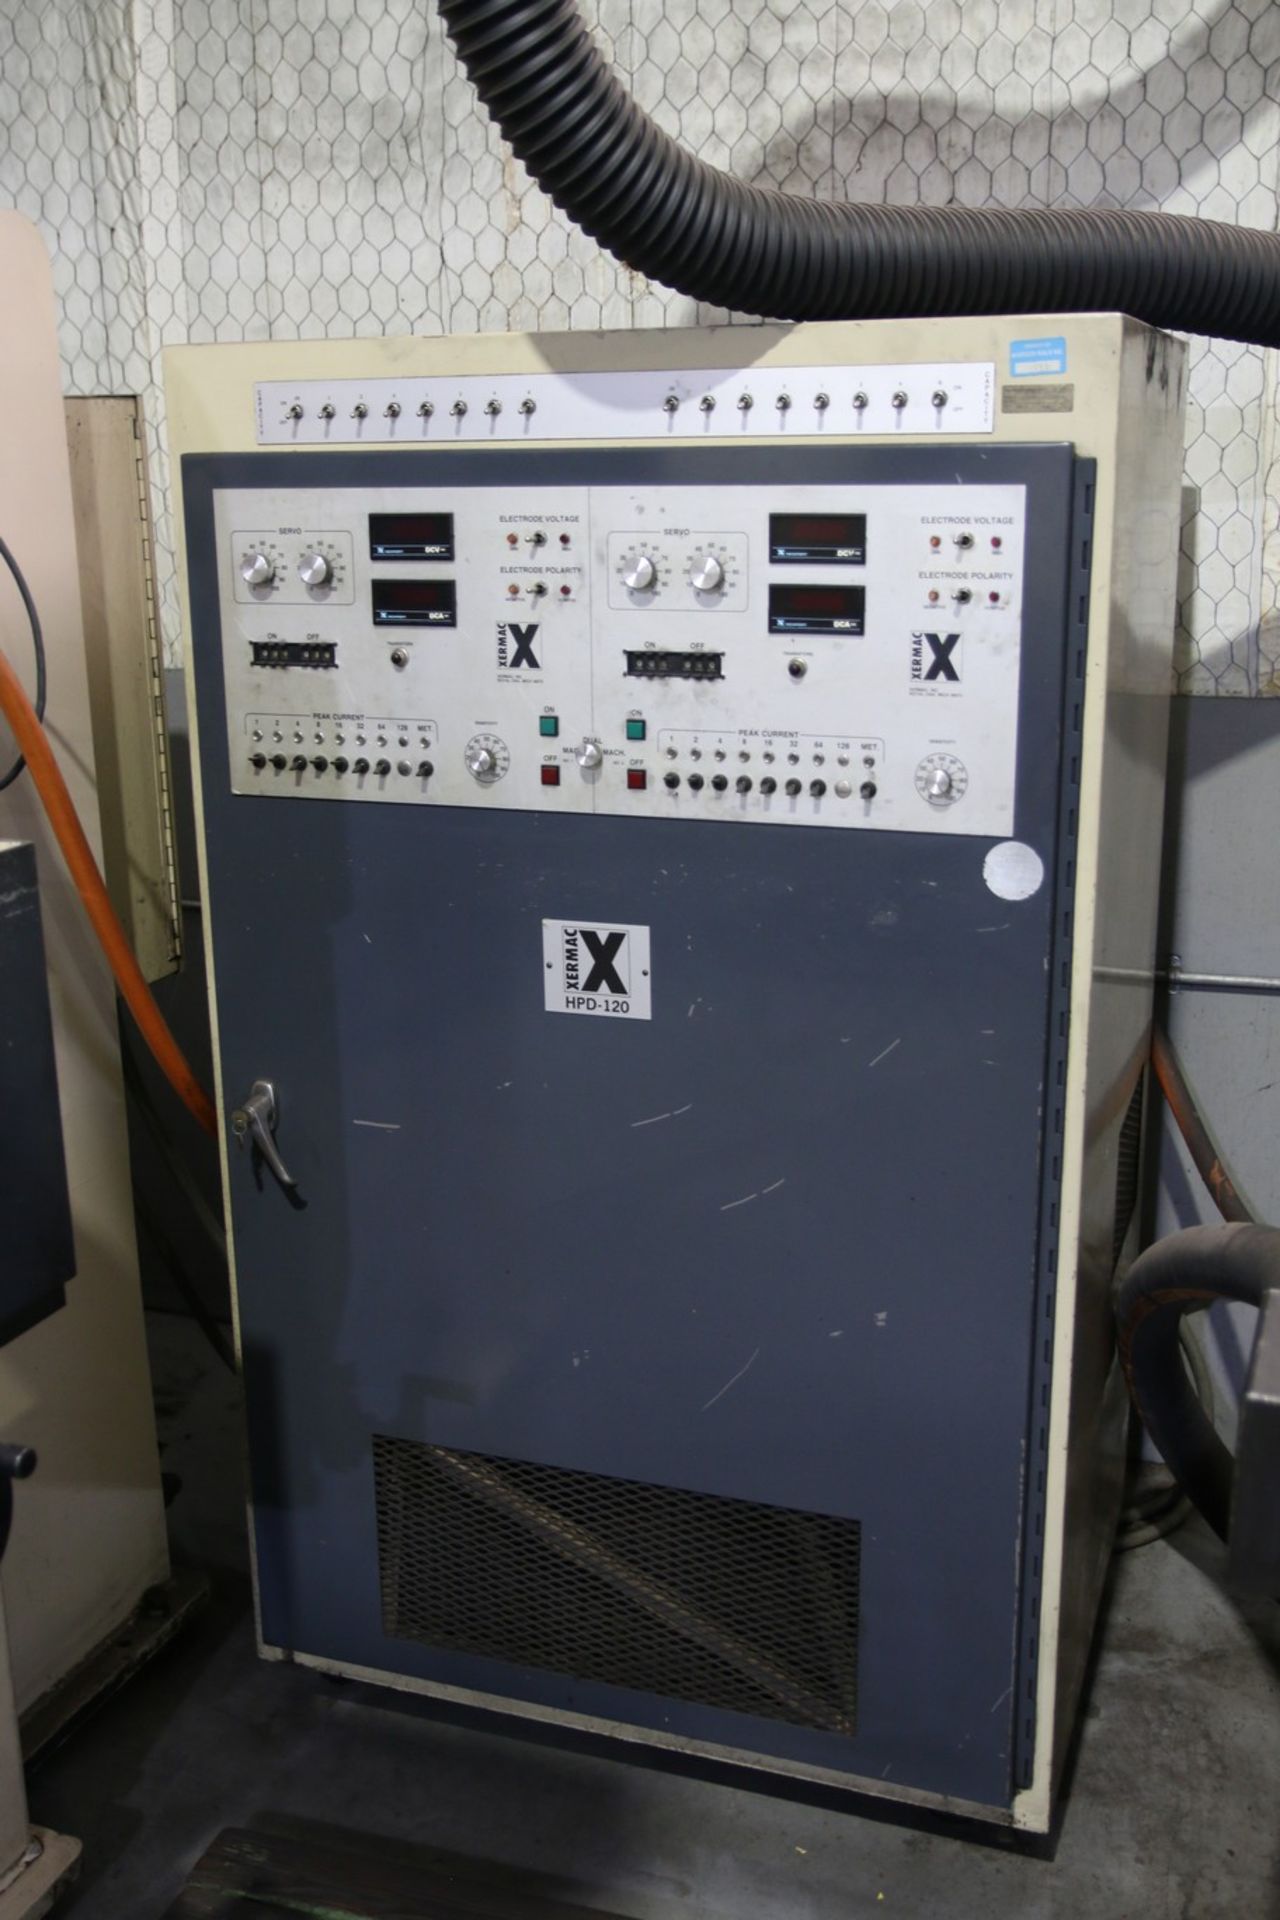 Xermac X-20 Xermac x-20 EDM Machines with Controller/Power Supply Lot of (2) Xermac X-20 EDM - Image 4 of 20